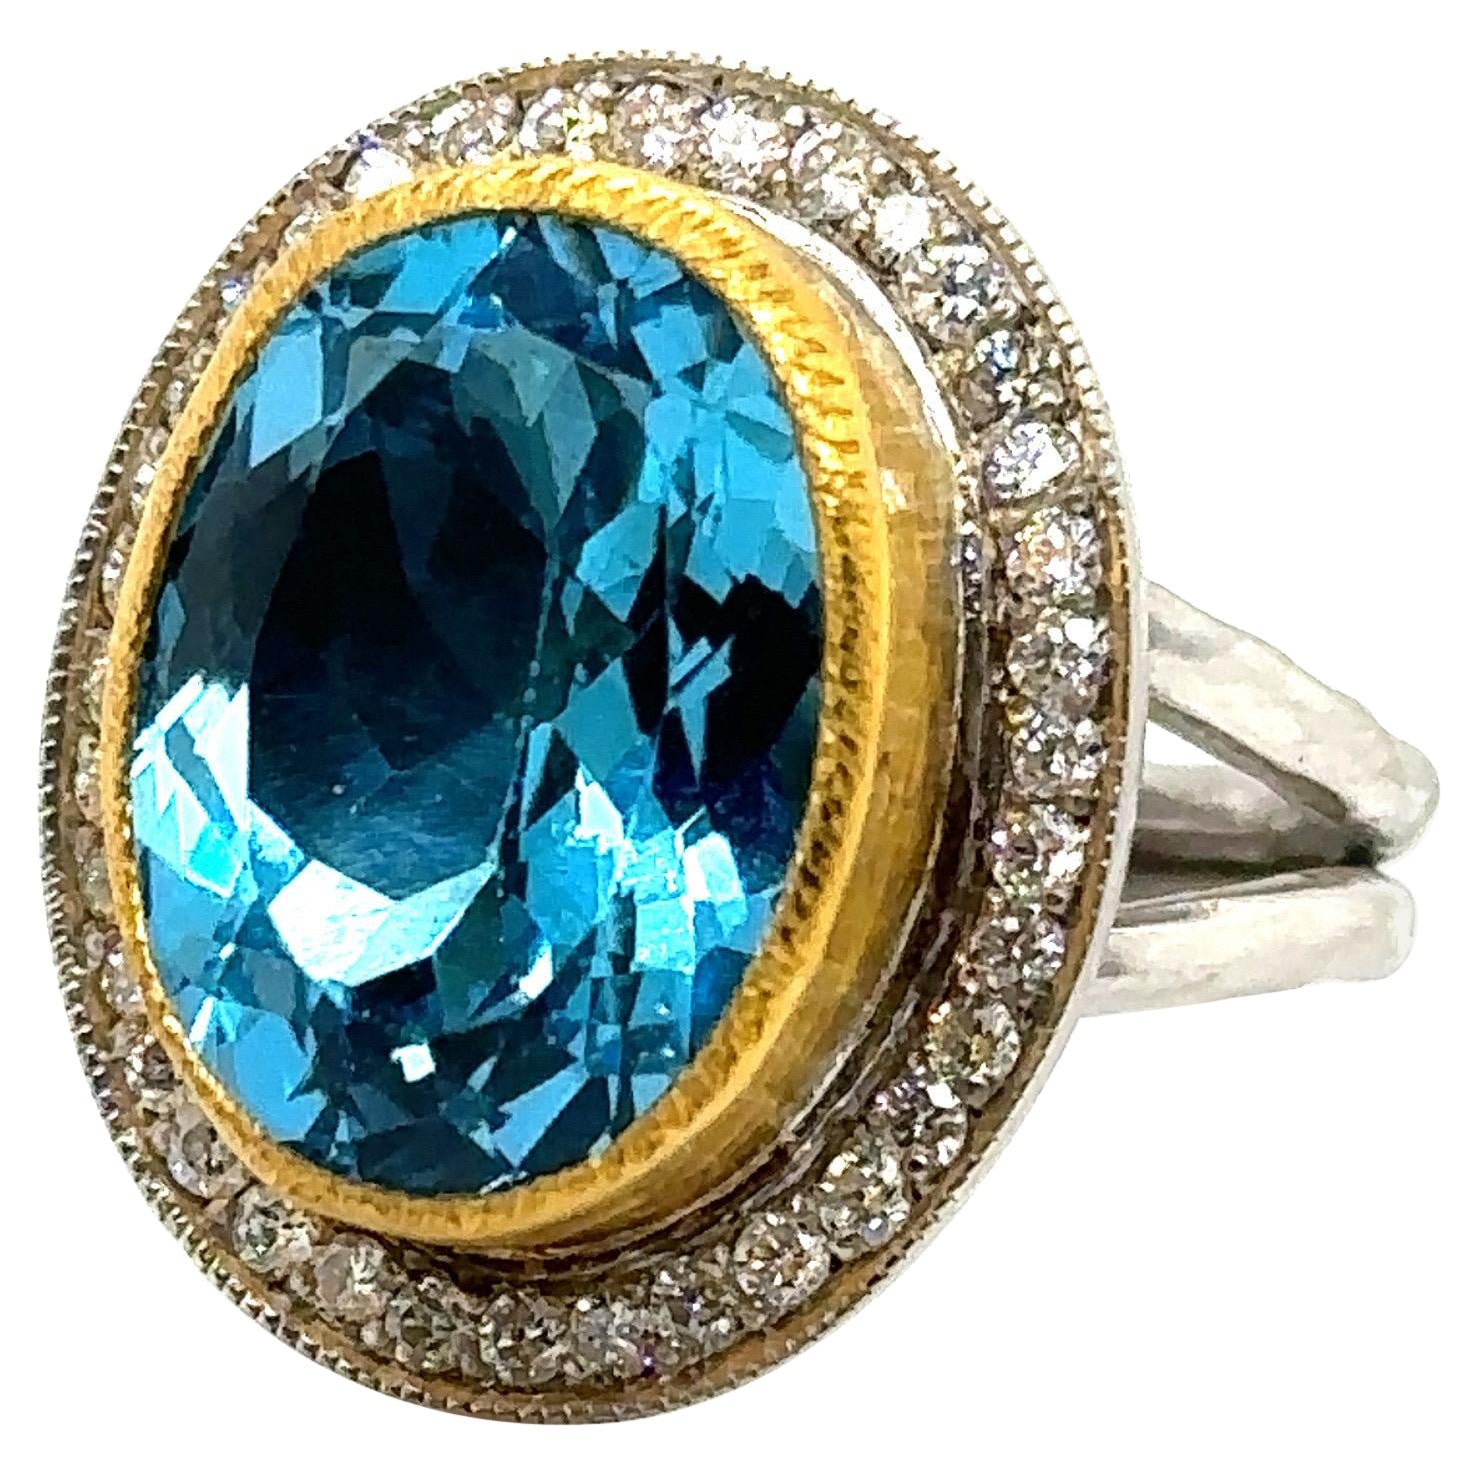 JAS-22-305 - 24K GOLD/STERLING SILVER RING with DIAMONDS AND SWISS BLUE TOPAZ For Sale